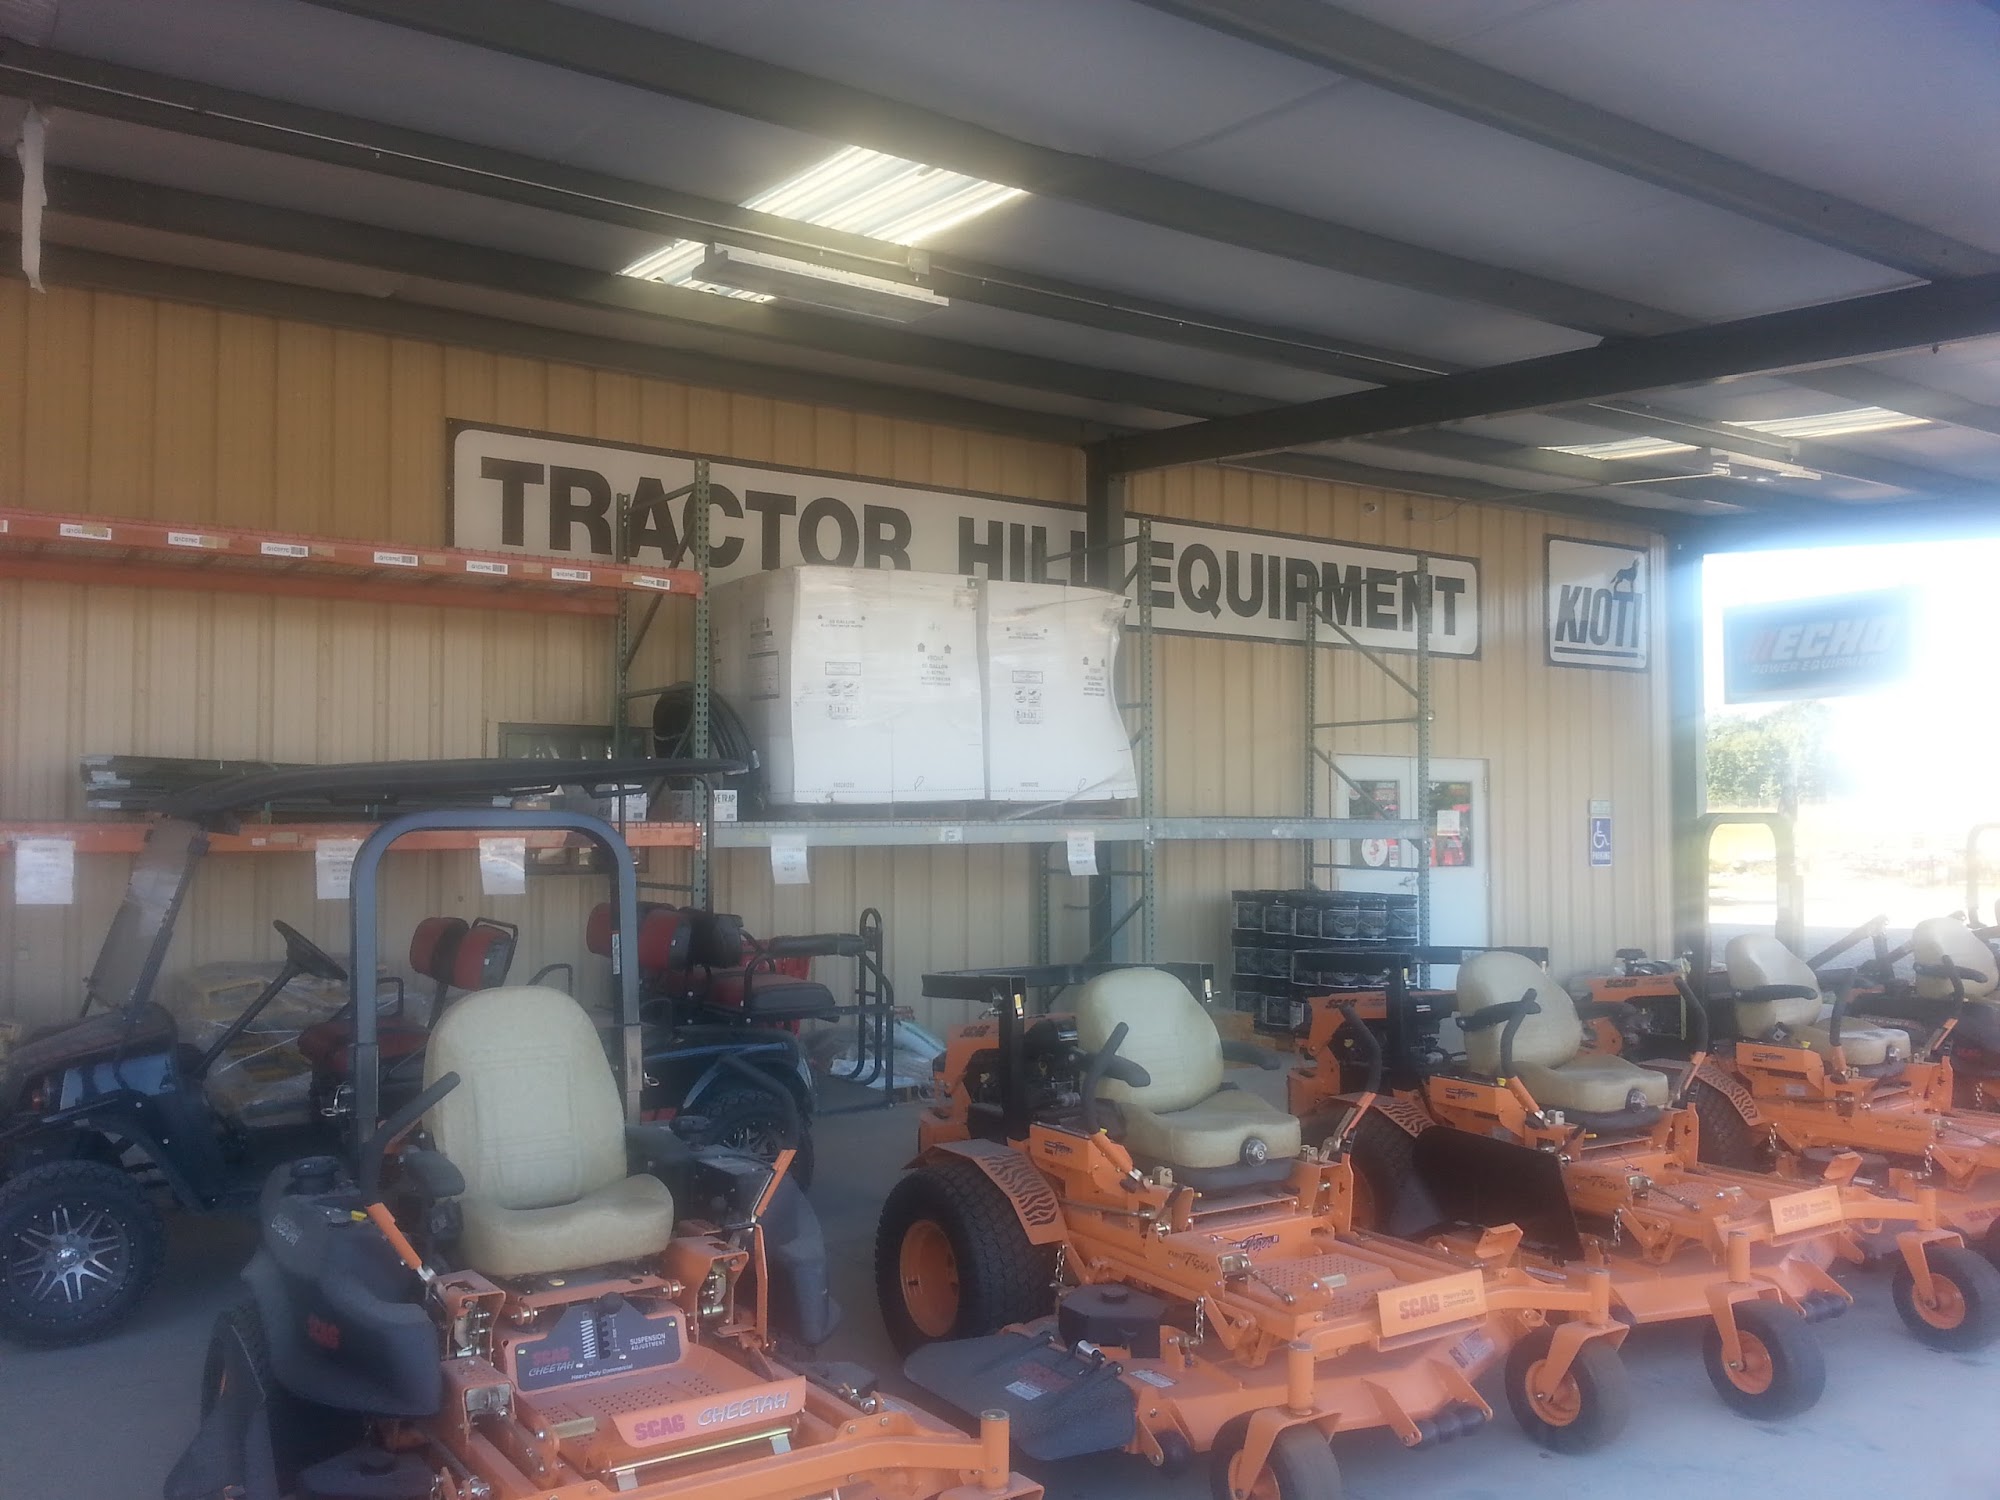 Tractor Hill Equipment